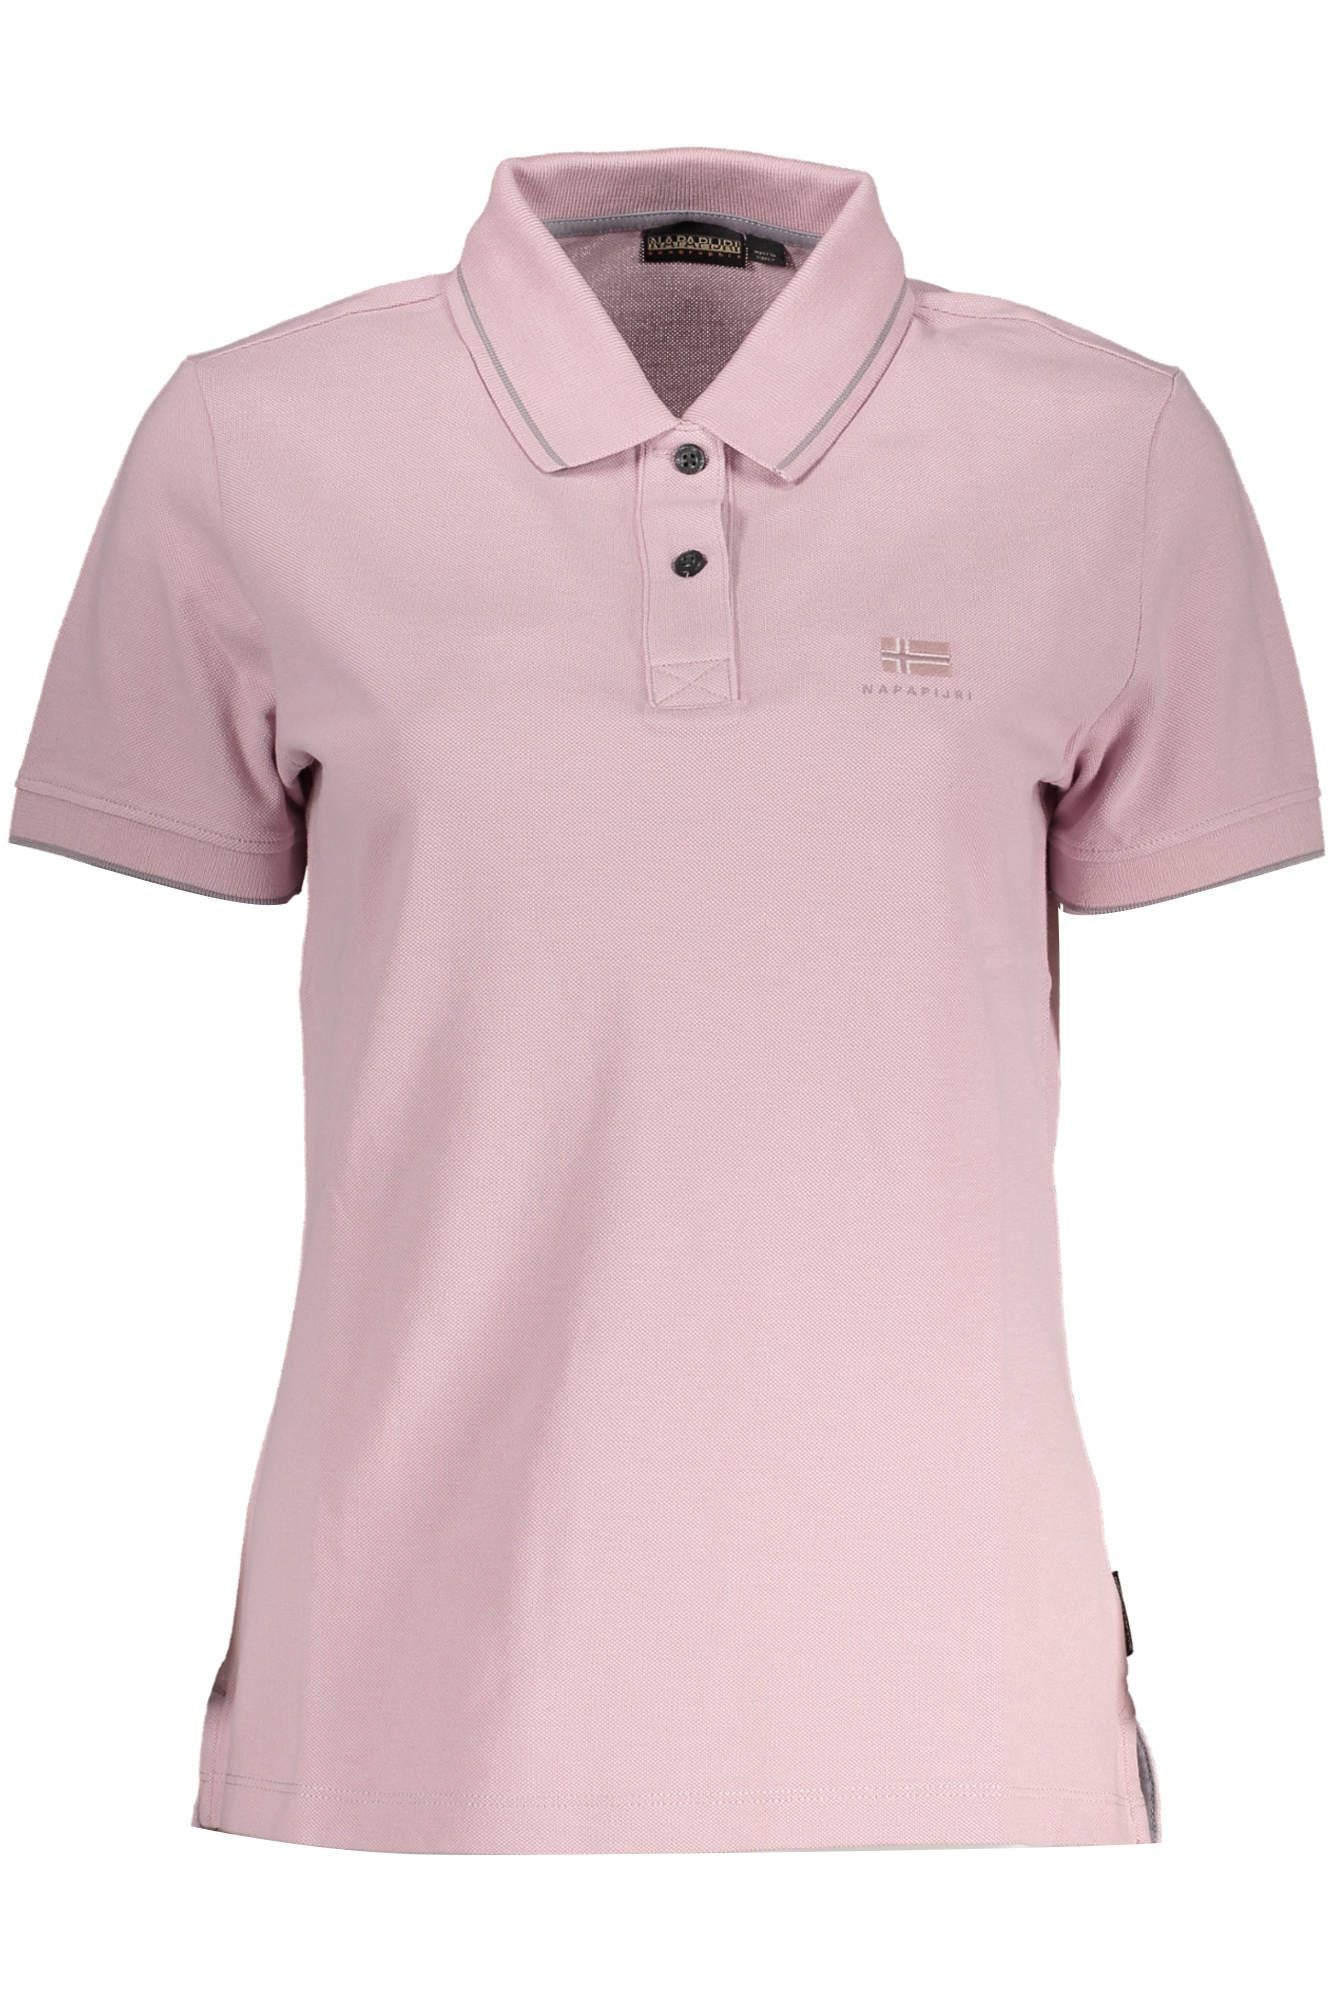 Napapijri Chic Pink Polo with Contrasting Details